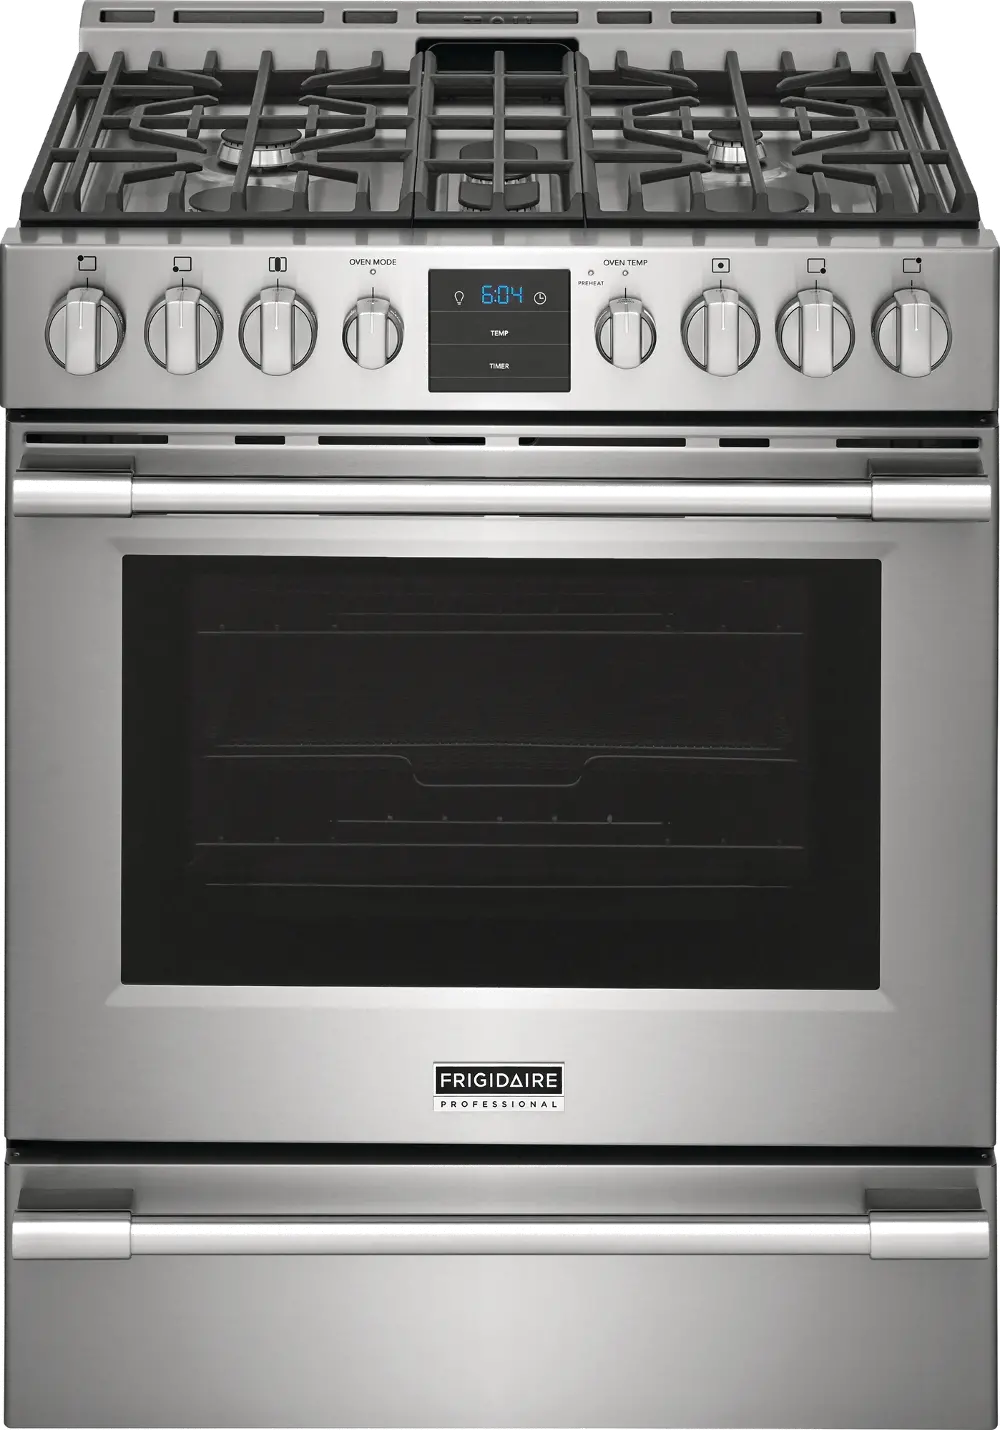 PCFG3078AF Frigidaire Professional 5.6 cu ft Gas Range - Stainless Steel-1